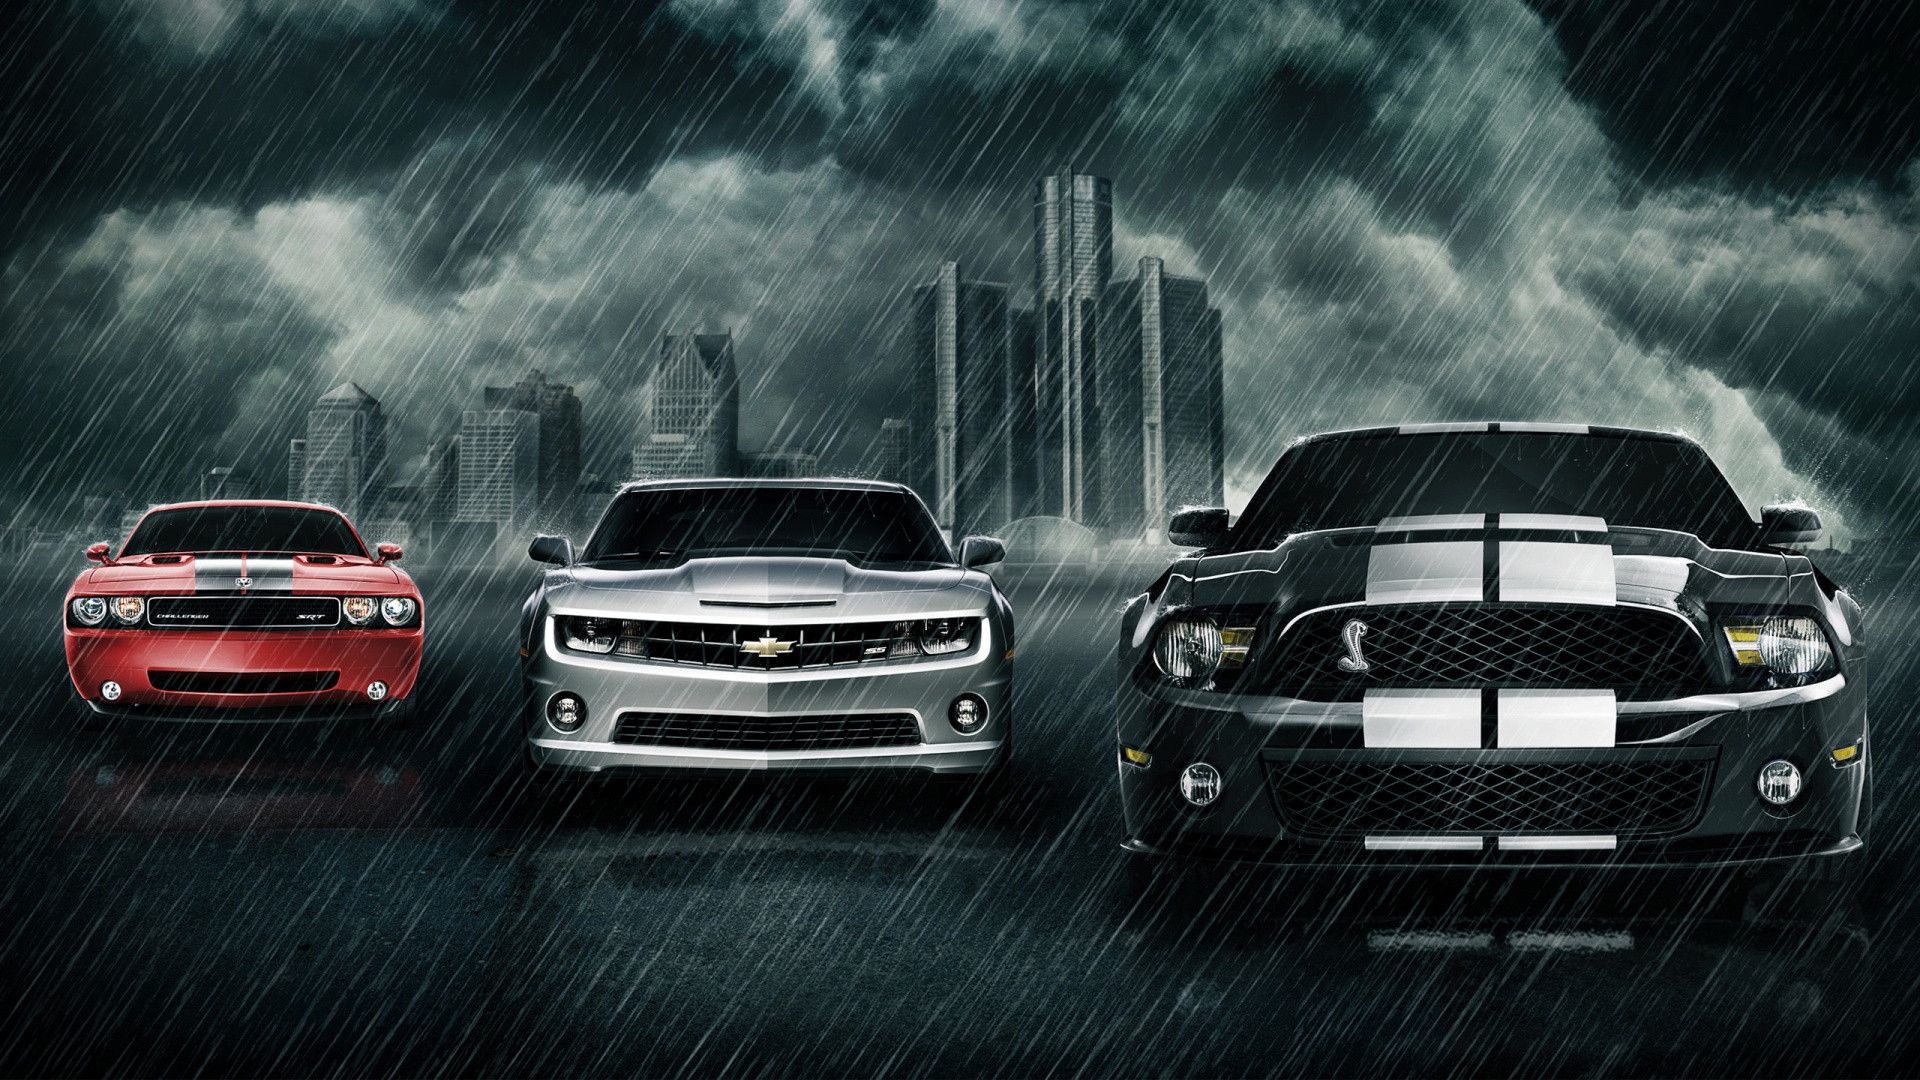 Download Free 1080p Car Backgrounds 